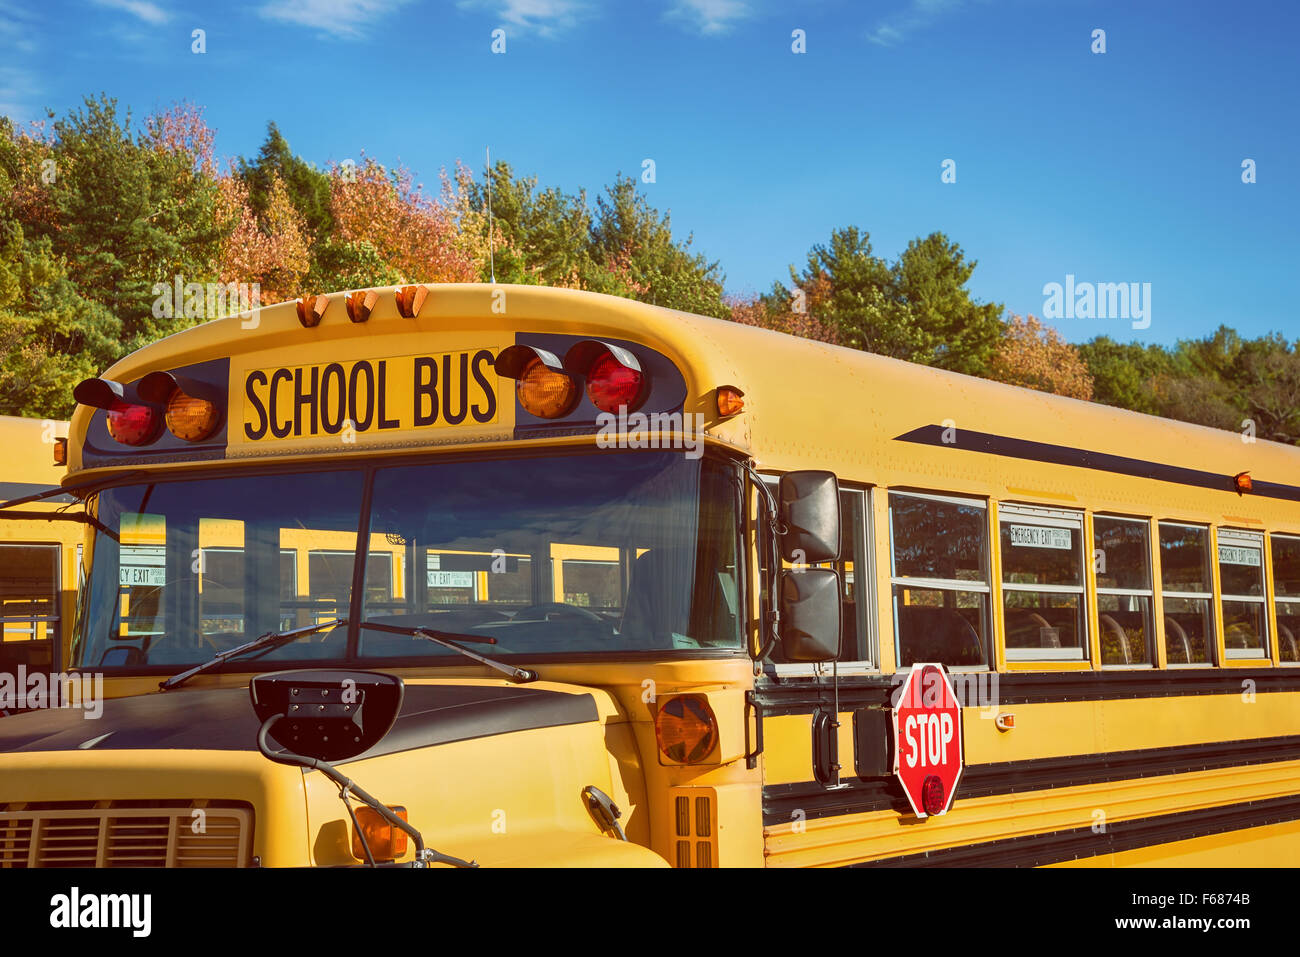 Yellow school bus in parking lot against autumn trees with beautiful blue sky Stock Photo